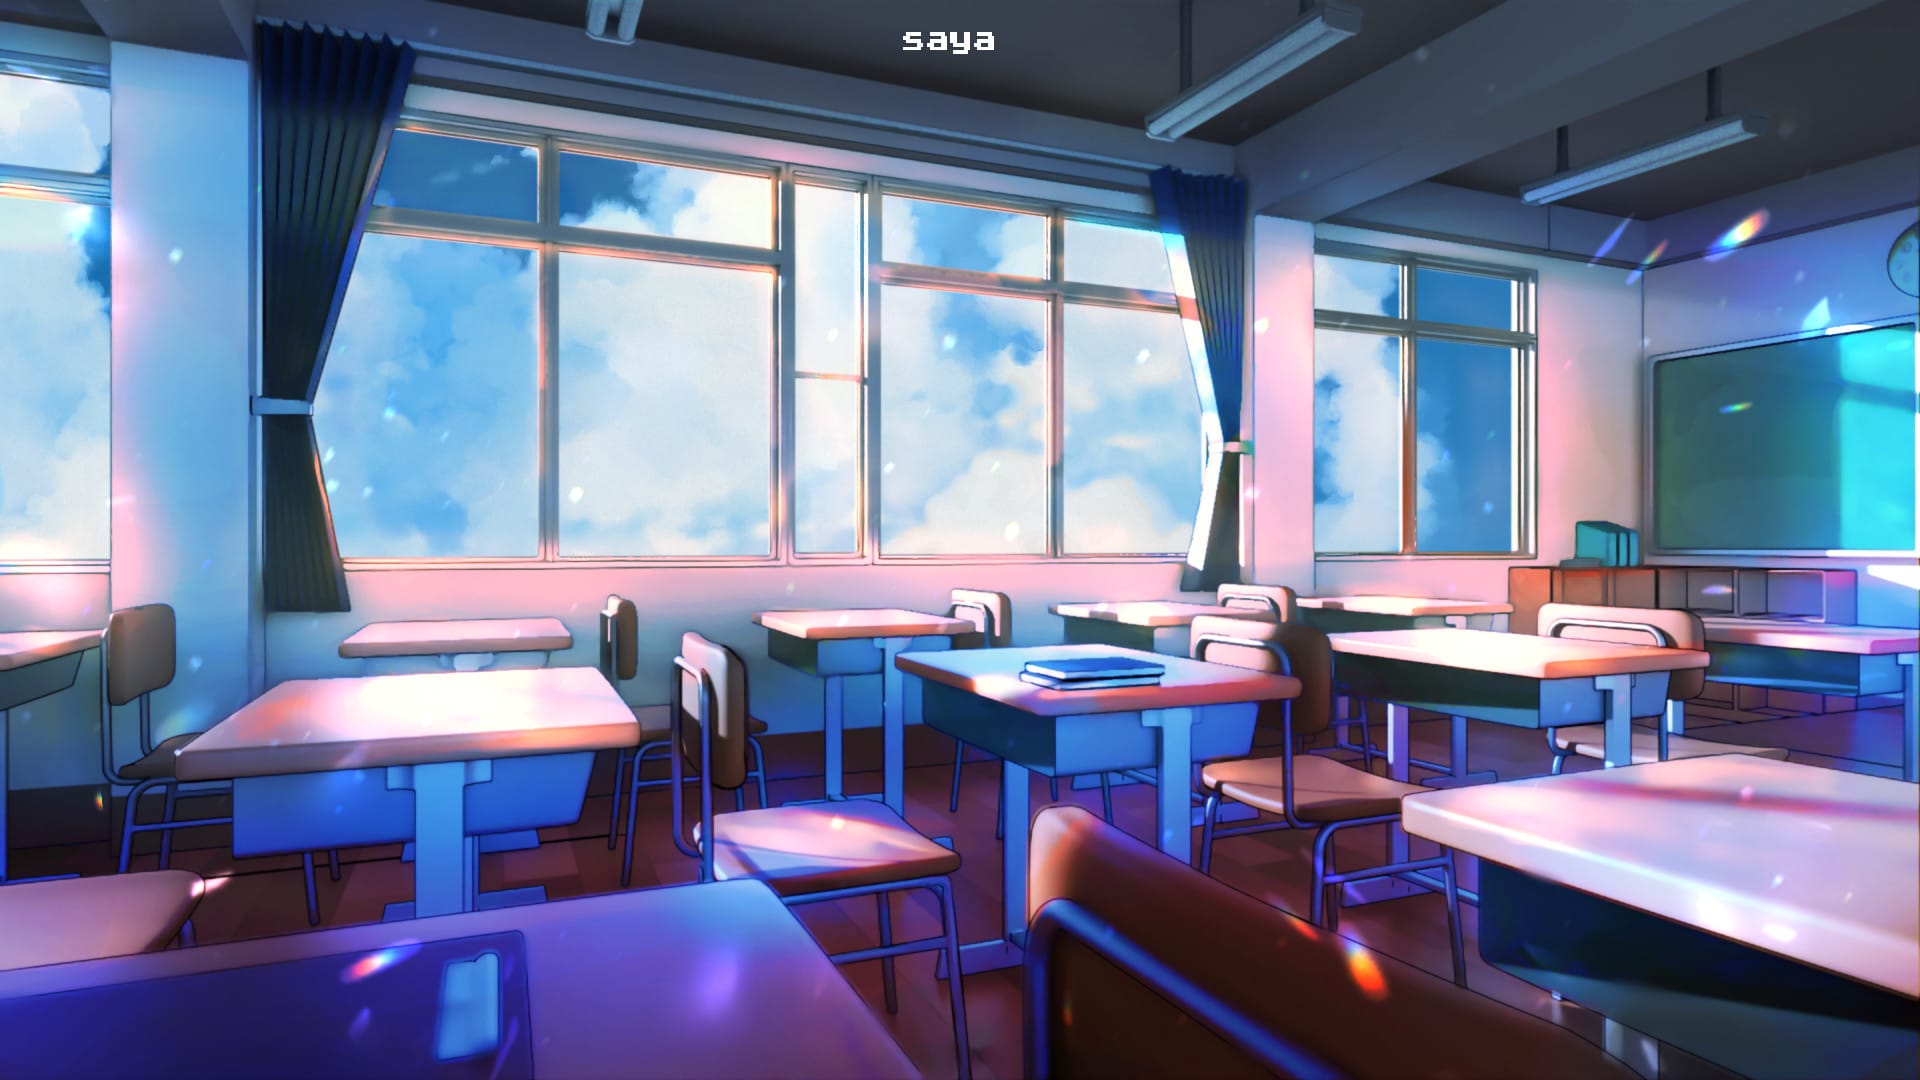 Draw beautiful background and concept art by Saya_art | Fiverr